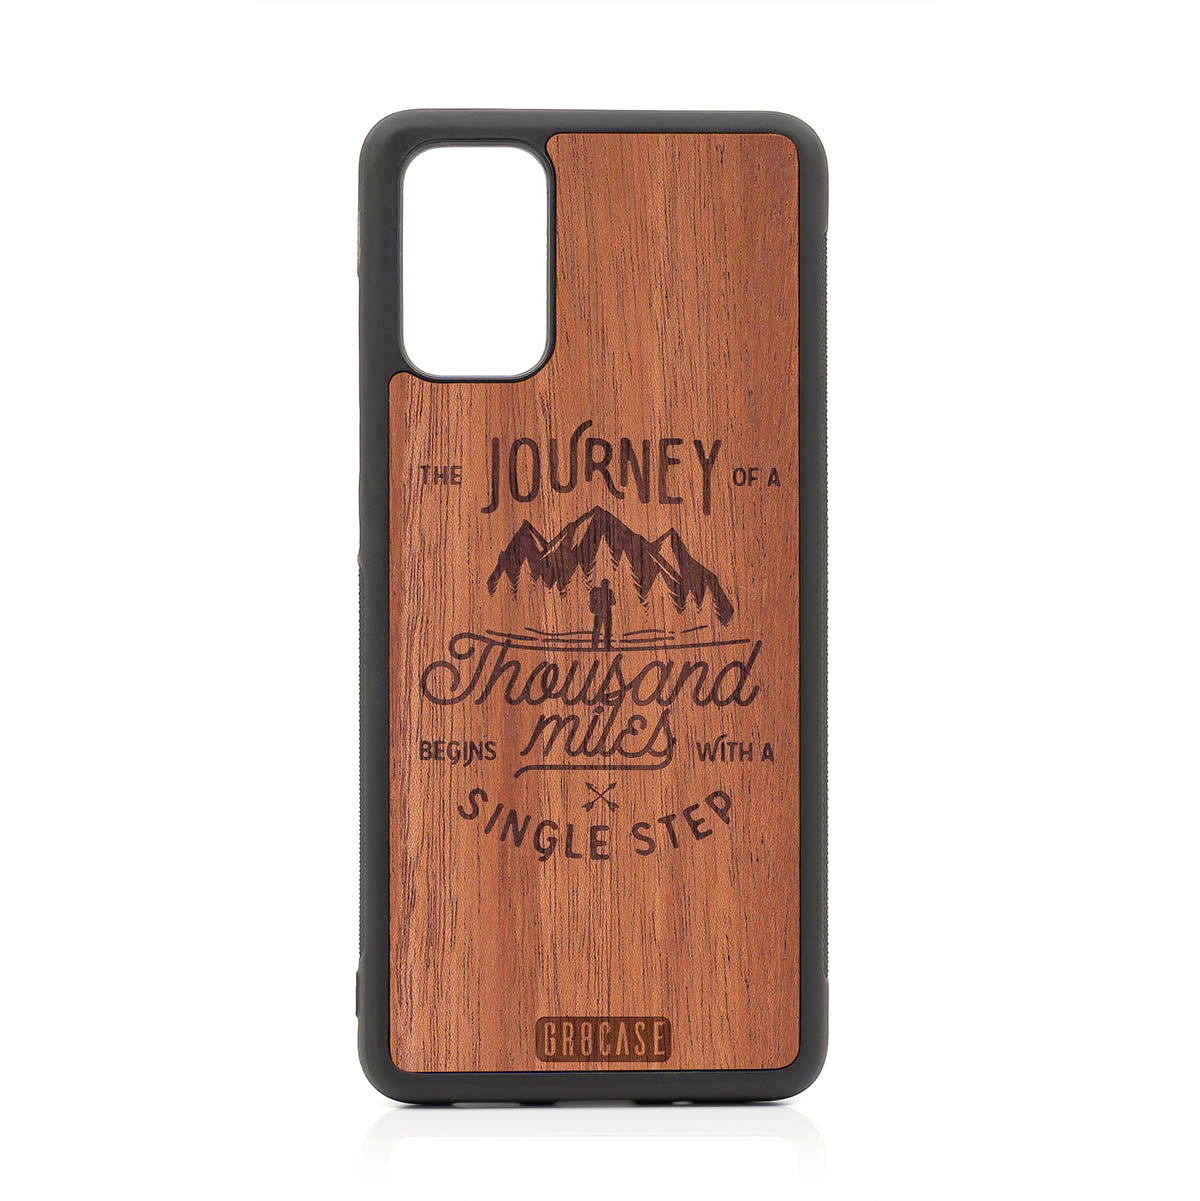 The Journey Of A Thousand Miles Begins With A Single Step Design Wood Case For Samsung Galaxy S20 Plus